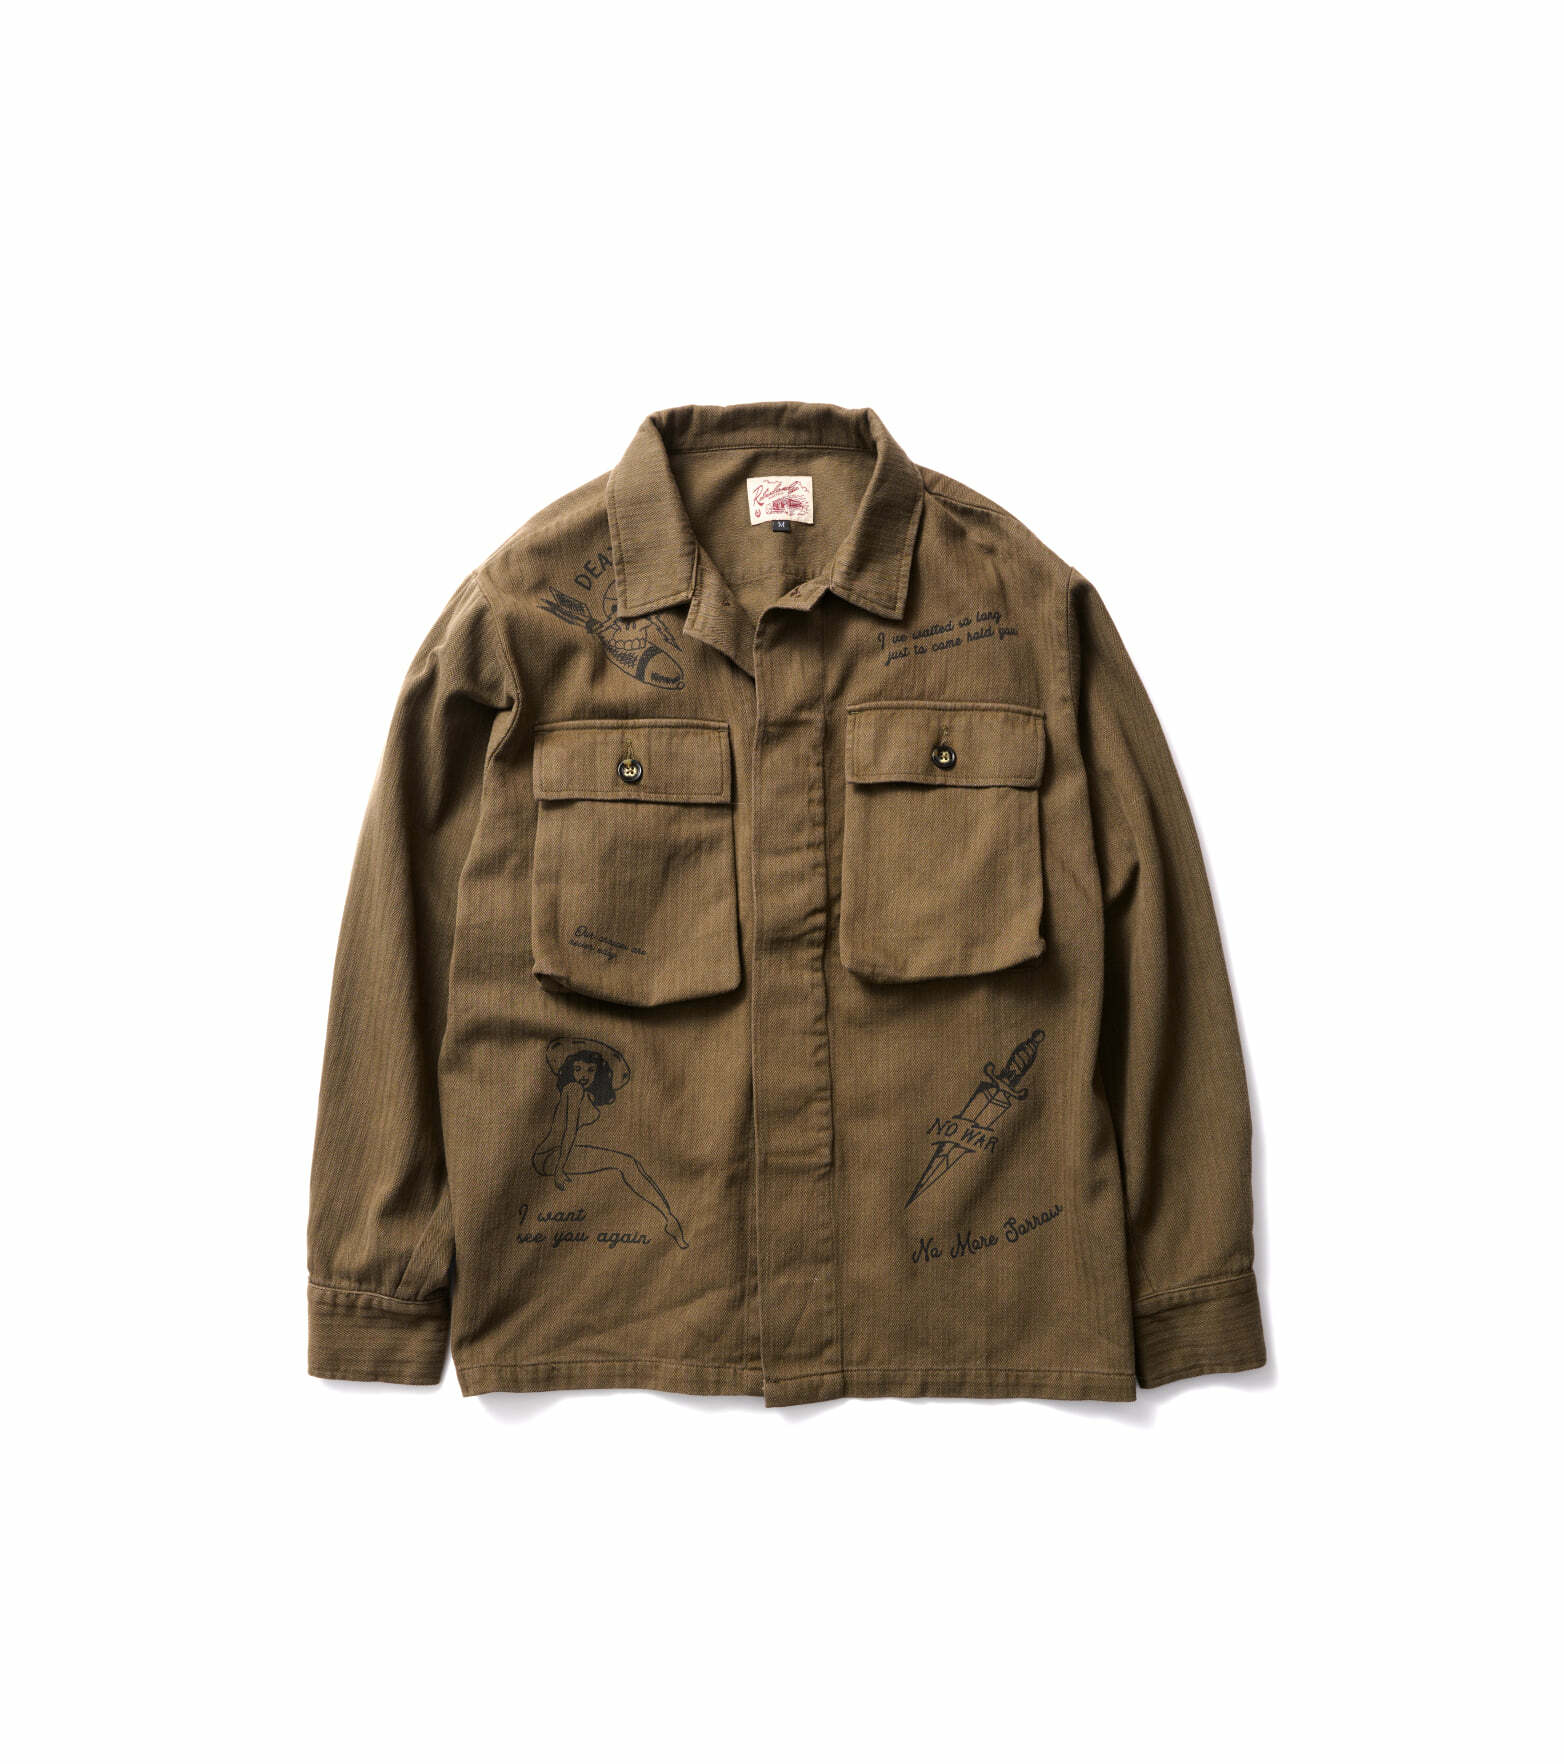 M43 WWII Shirt Olive